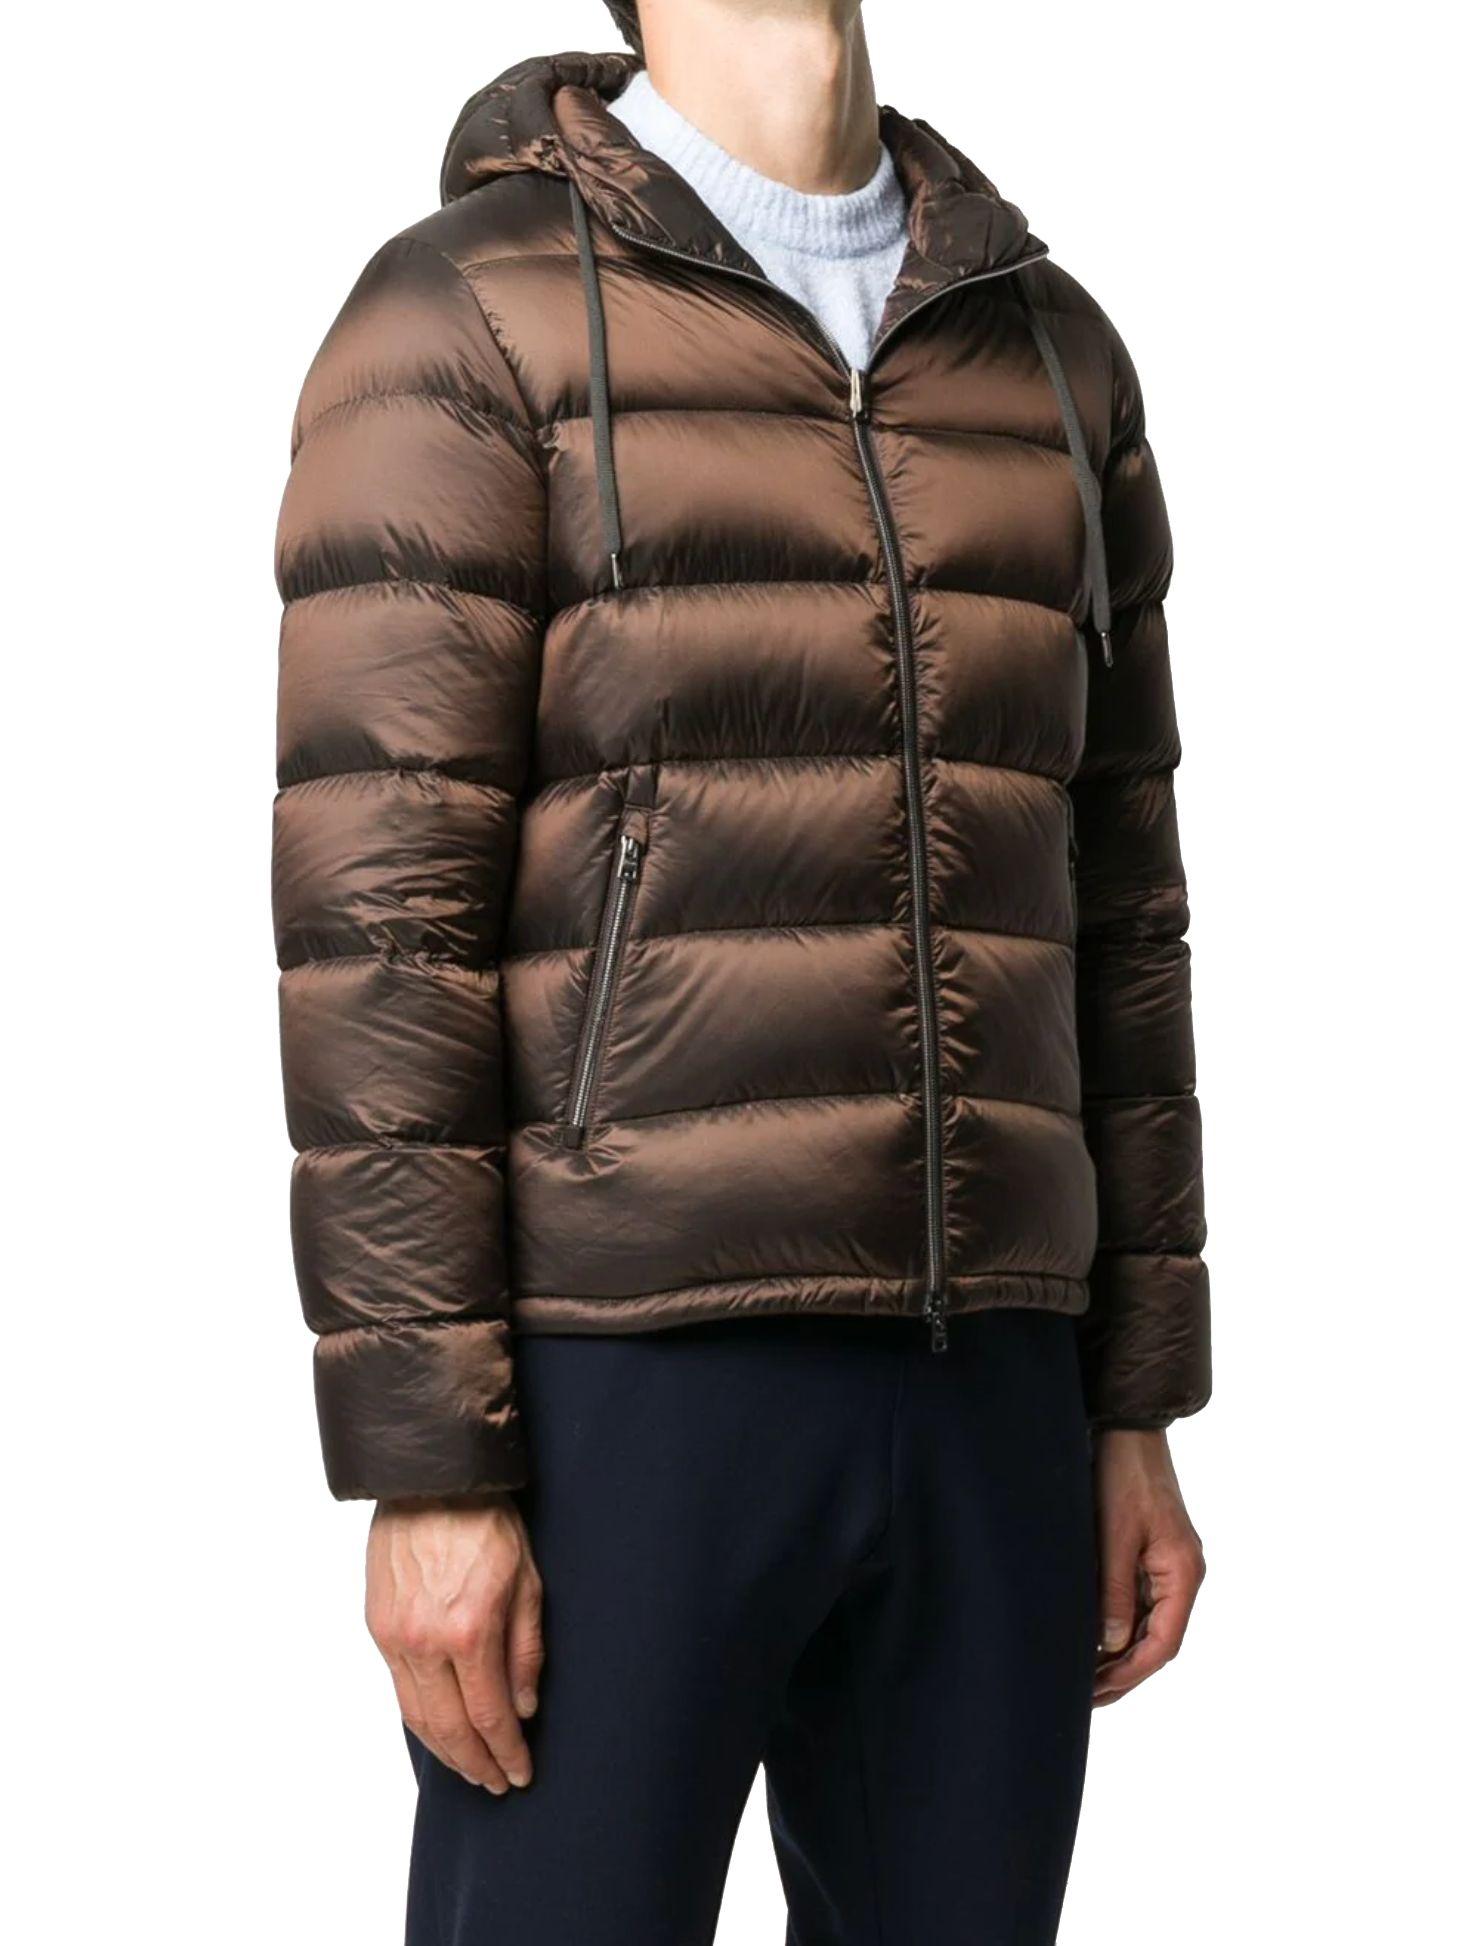 Herno Synthetic Polyamide Down Jacket in Brown for Men - Lyst